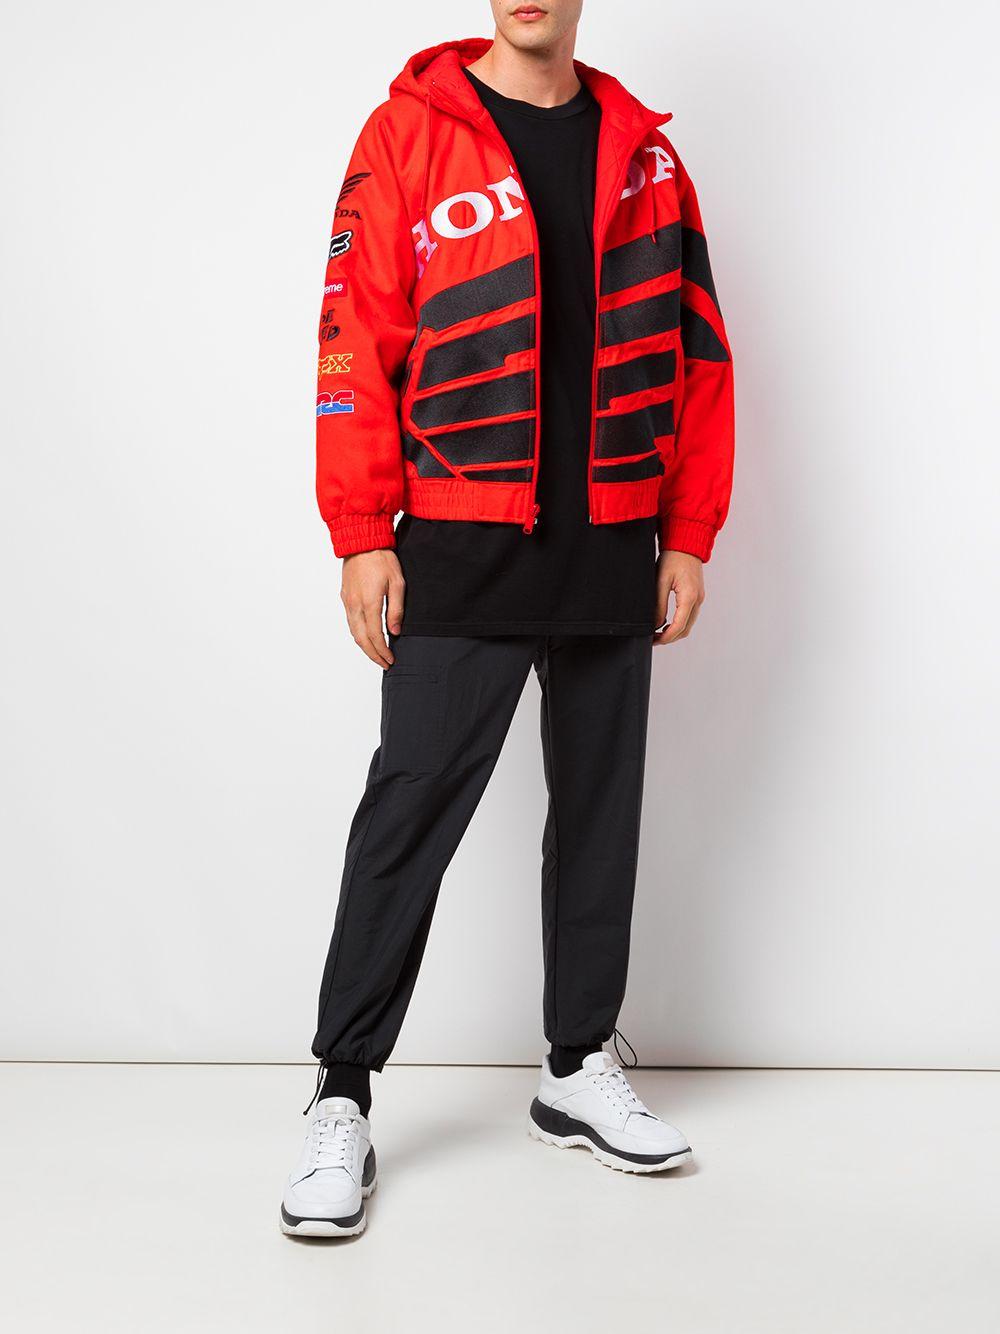 Supreme Cotton X Honda X Fox Racing Puffy Zip Up Jacket in Red for Men